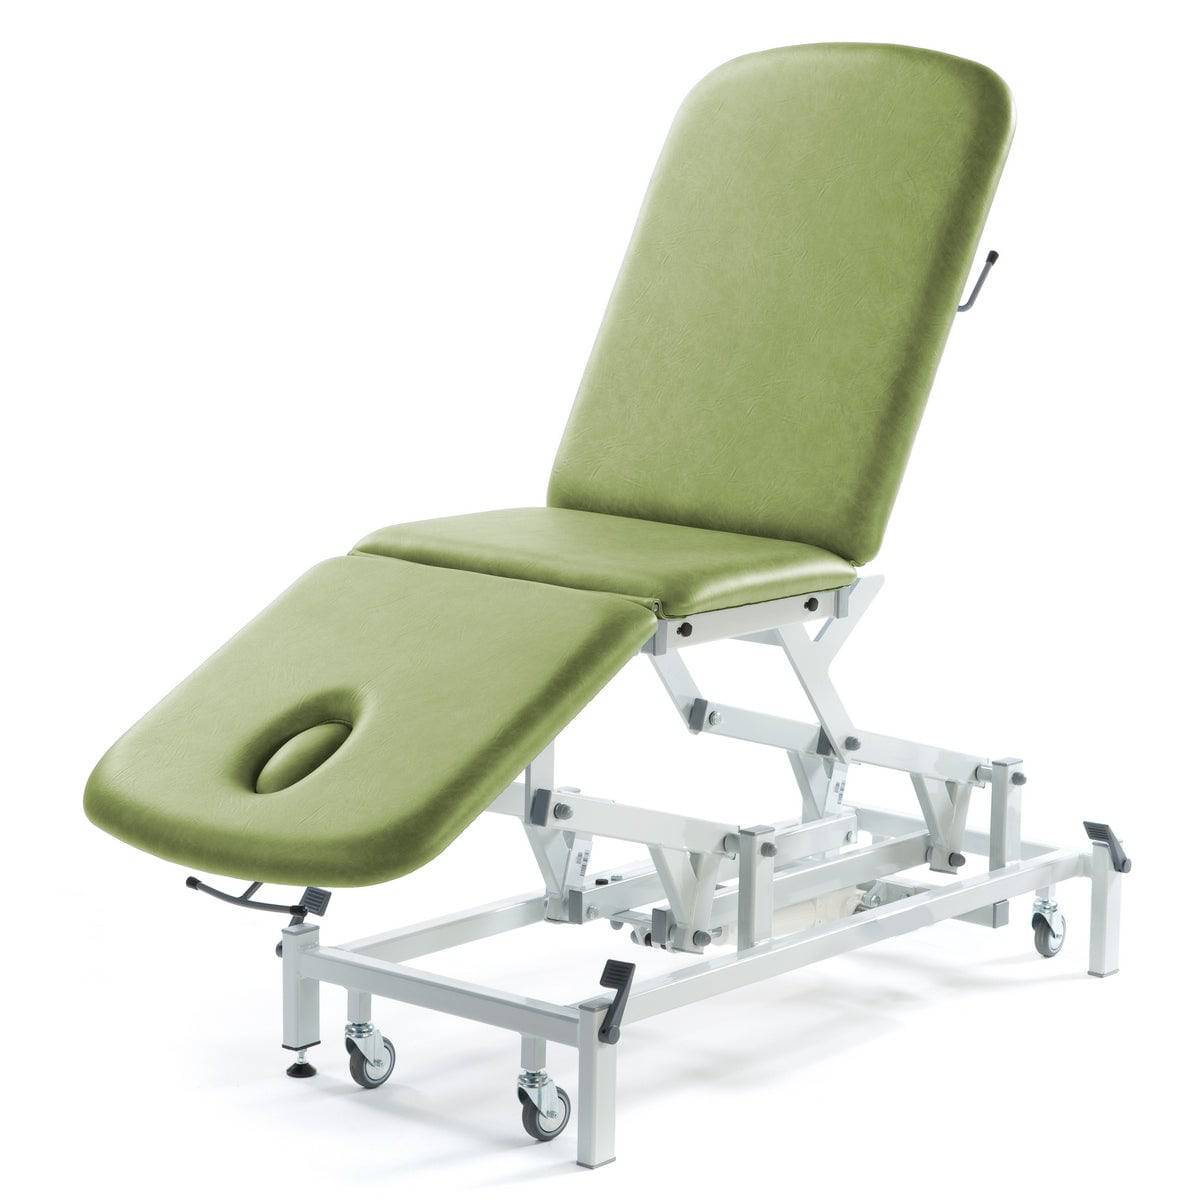 Seers 3 Section Electric Examination Couch